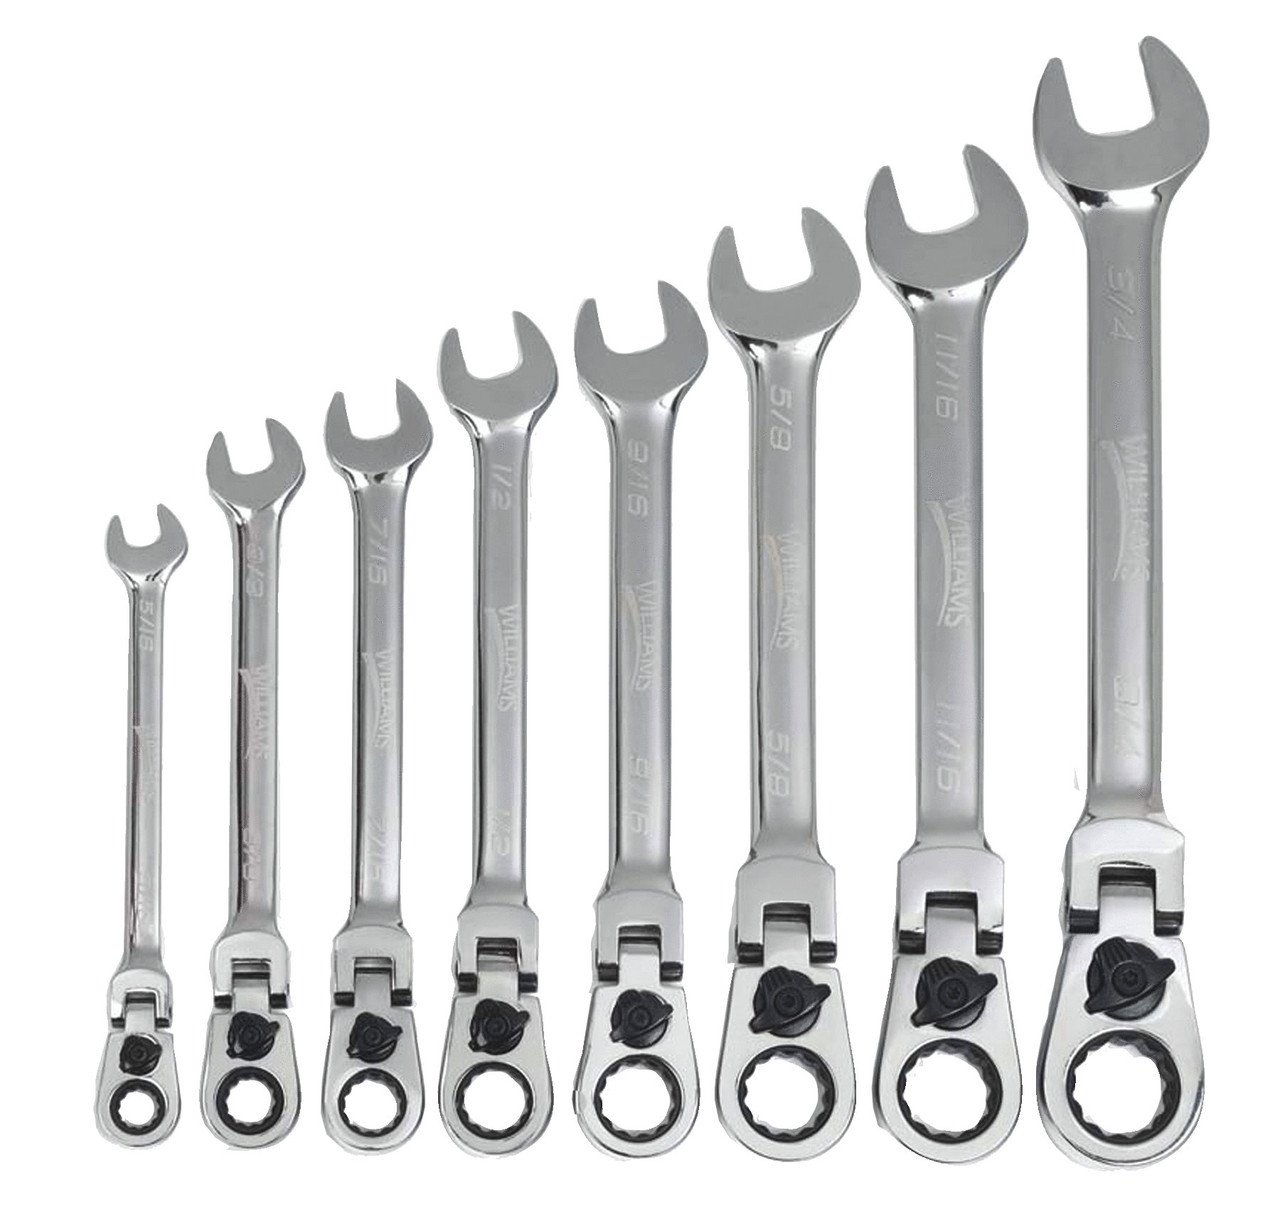 5/16"-3/4" Williams Polished Chrome Reversible Flex Head Ratcheting Combination Wrench Set 8 Pcs in Plastic Tray - JHWWS1168RCF